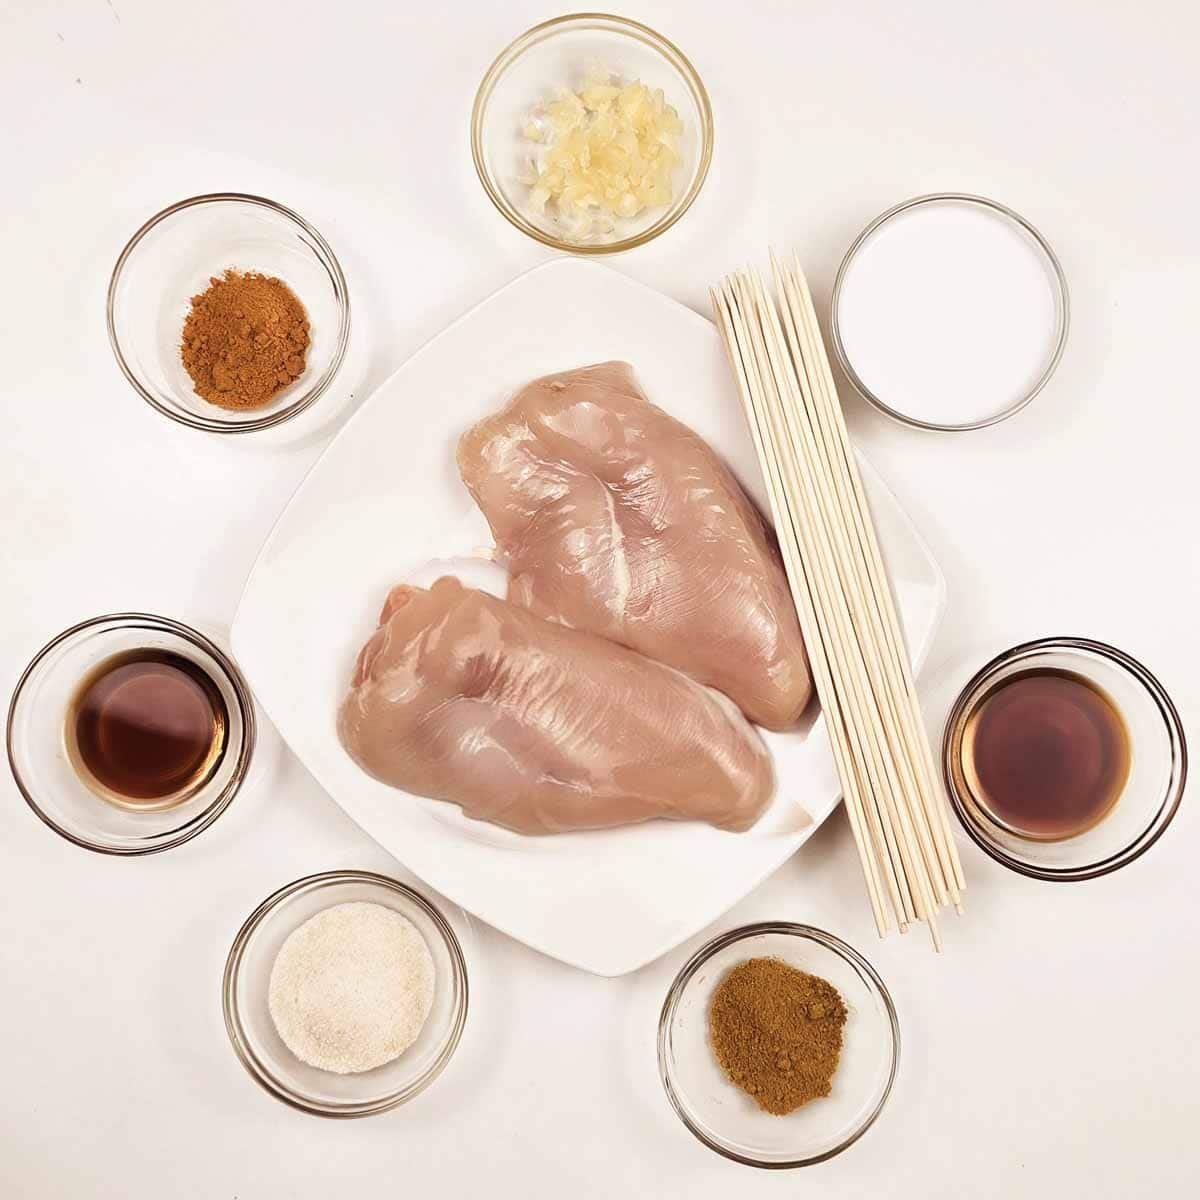 Raw chicken breast surrounded by key ingredients like soy sauce, garlic, and lime, ready for marinating."